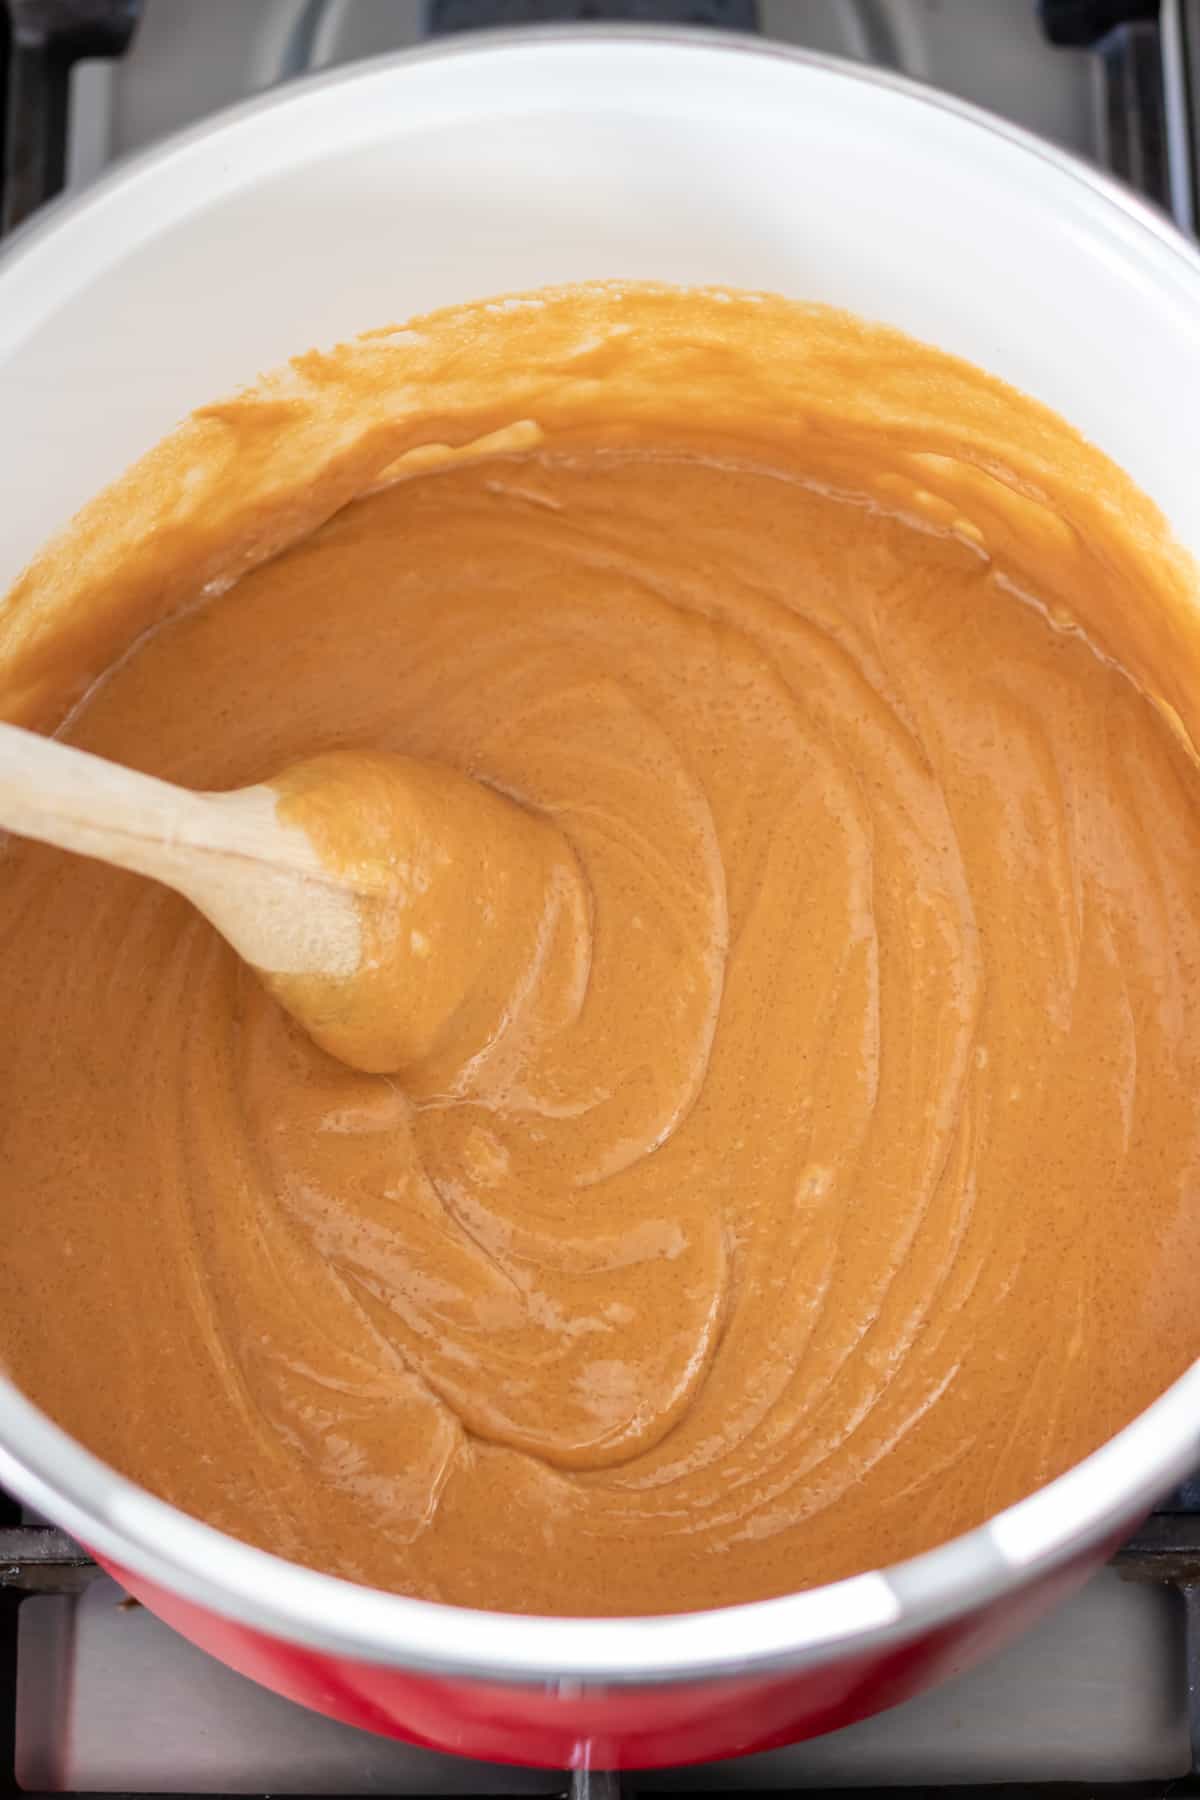 Syrup, sugar and peanut butter mixed together.